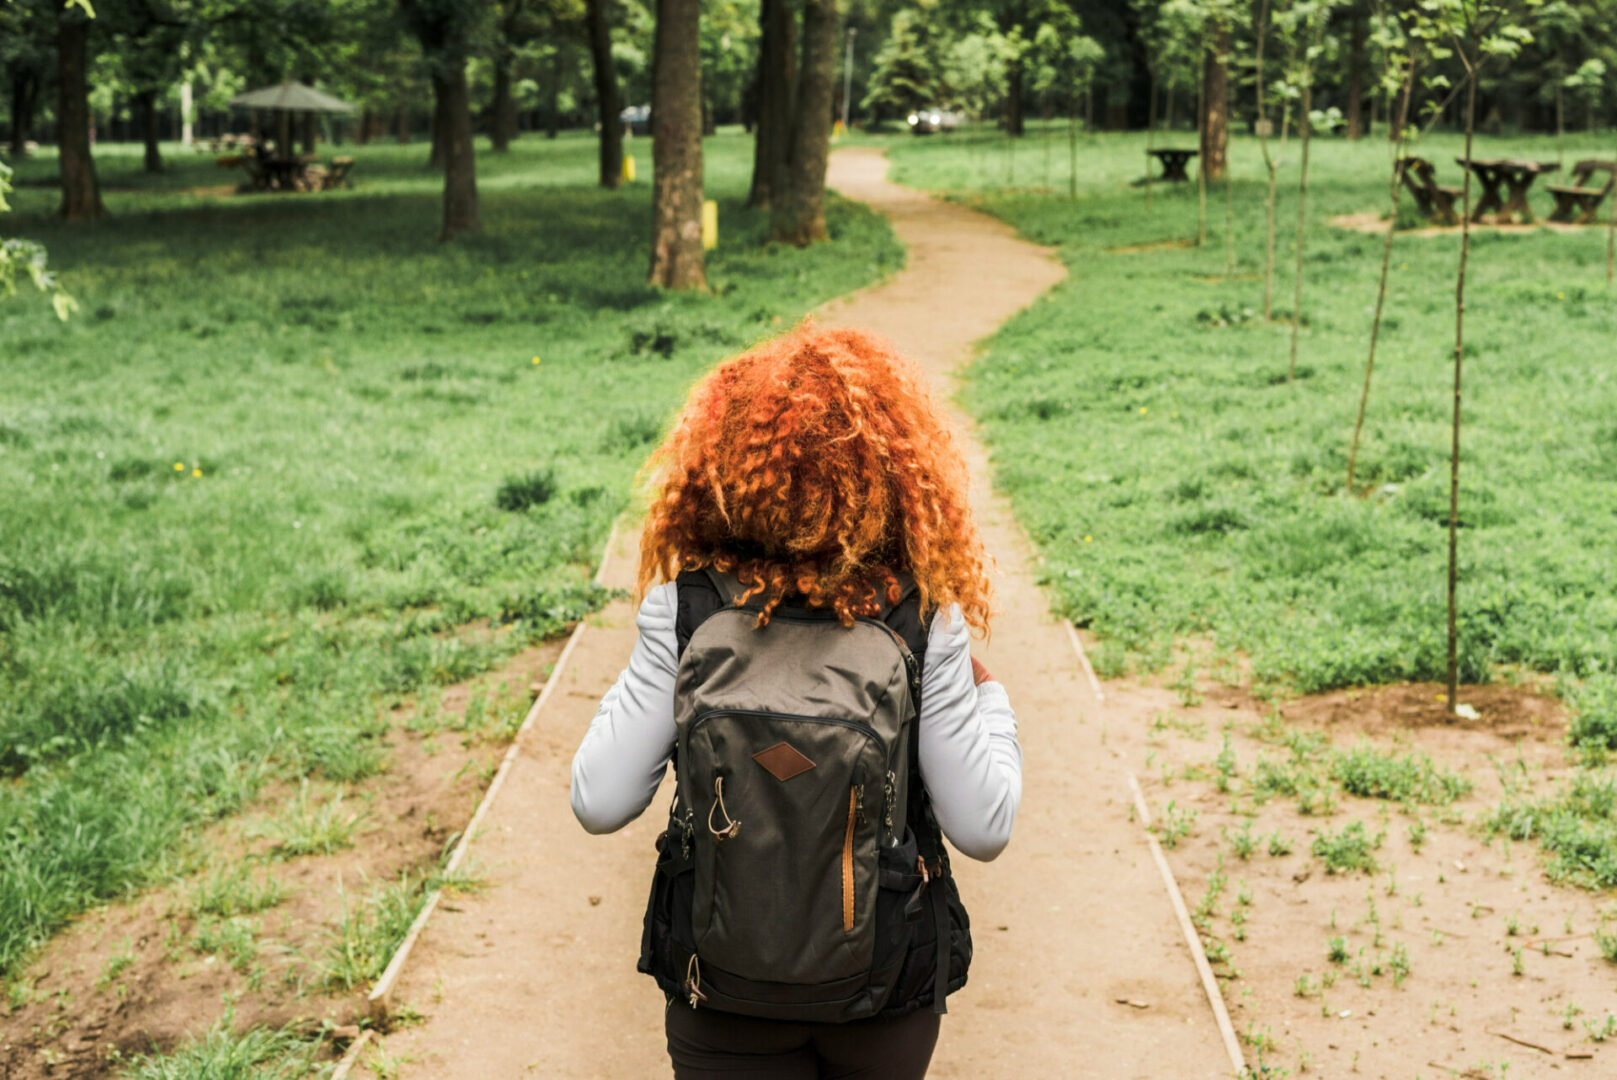 A person with red hair is walking down the path